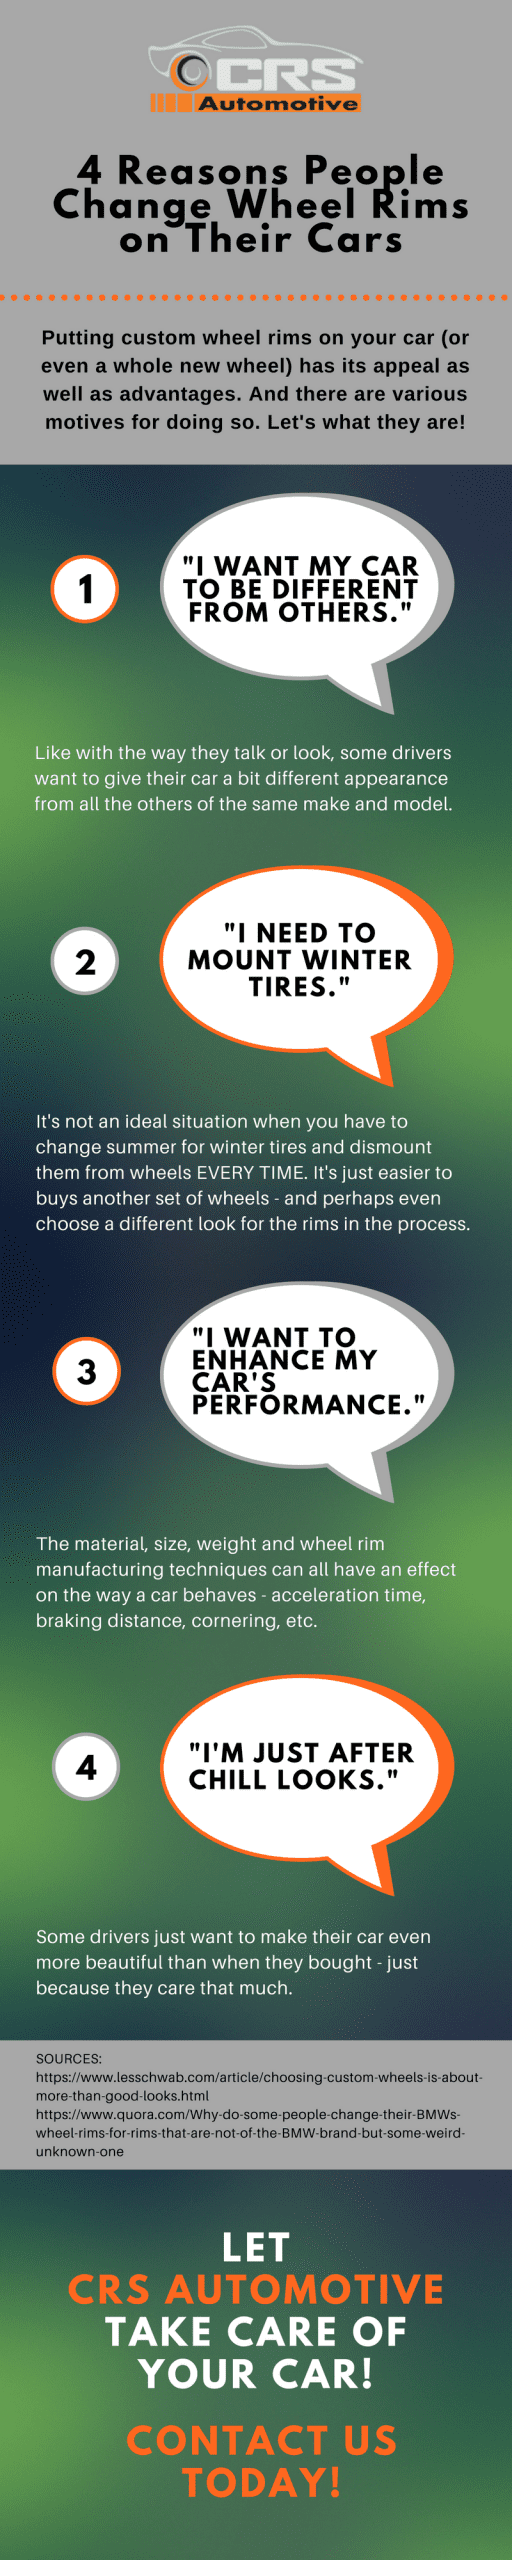 4 Reasons People Change Wheel Rims on Their Cars Infographic